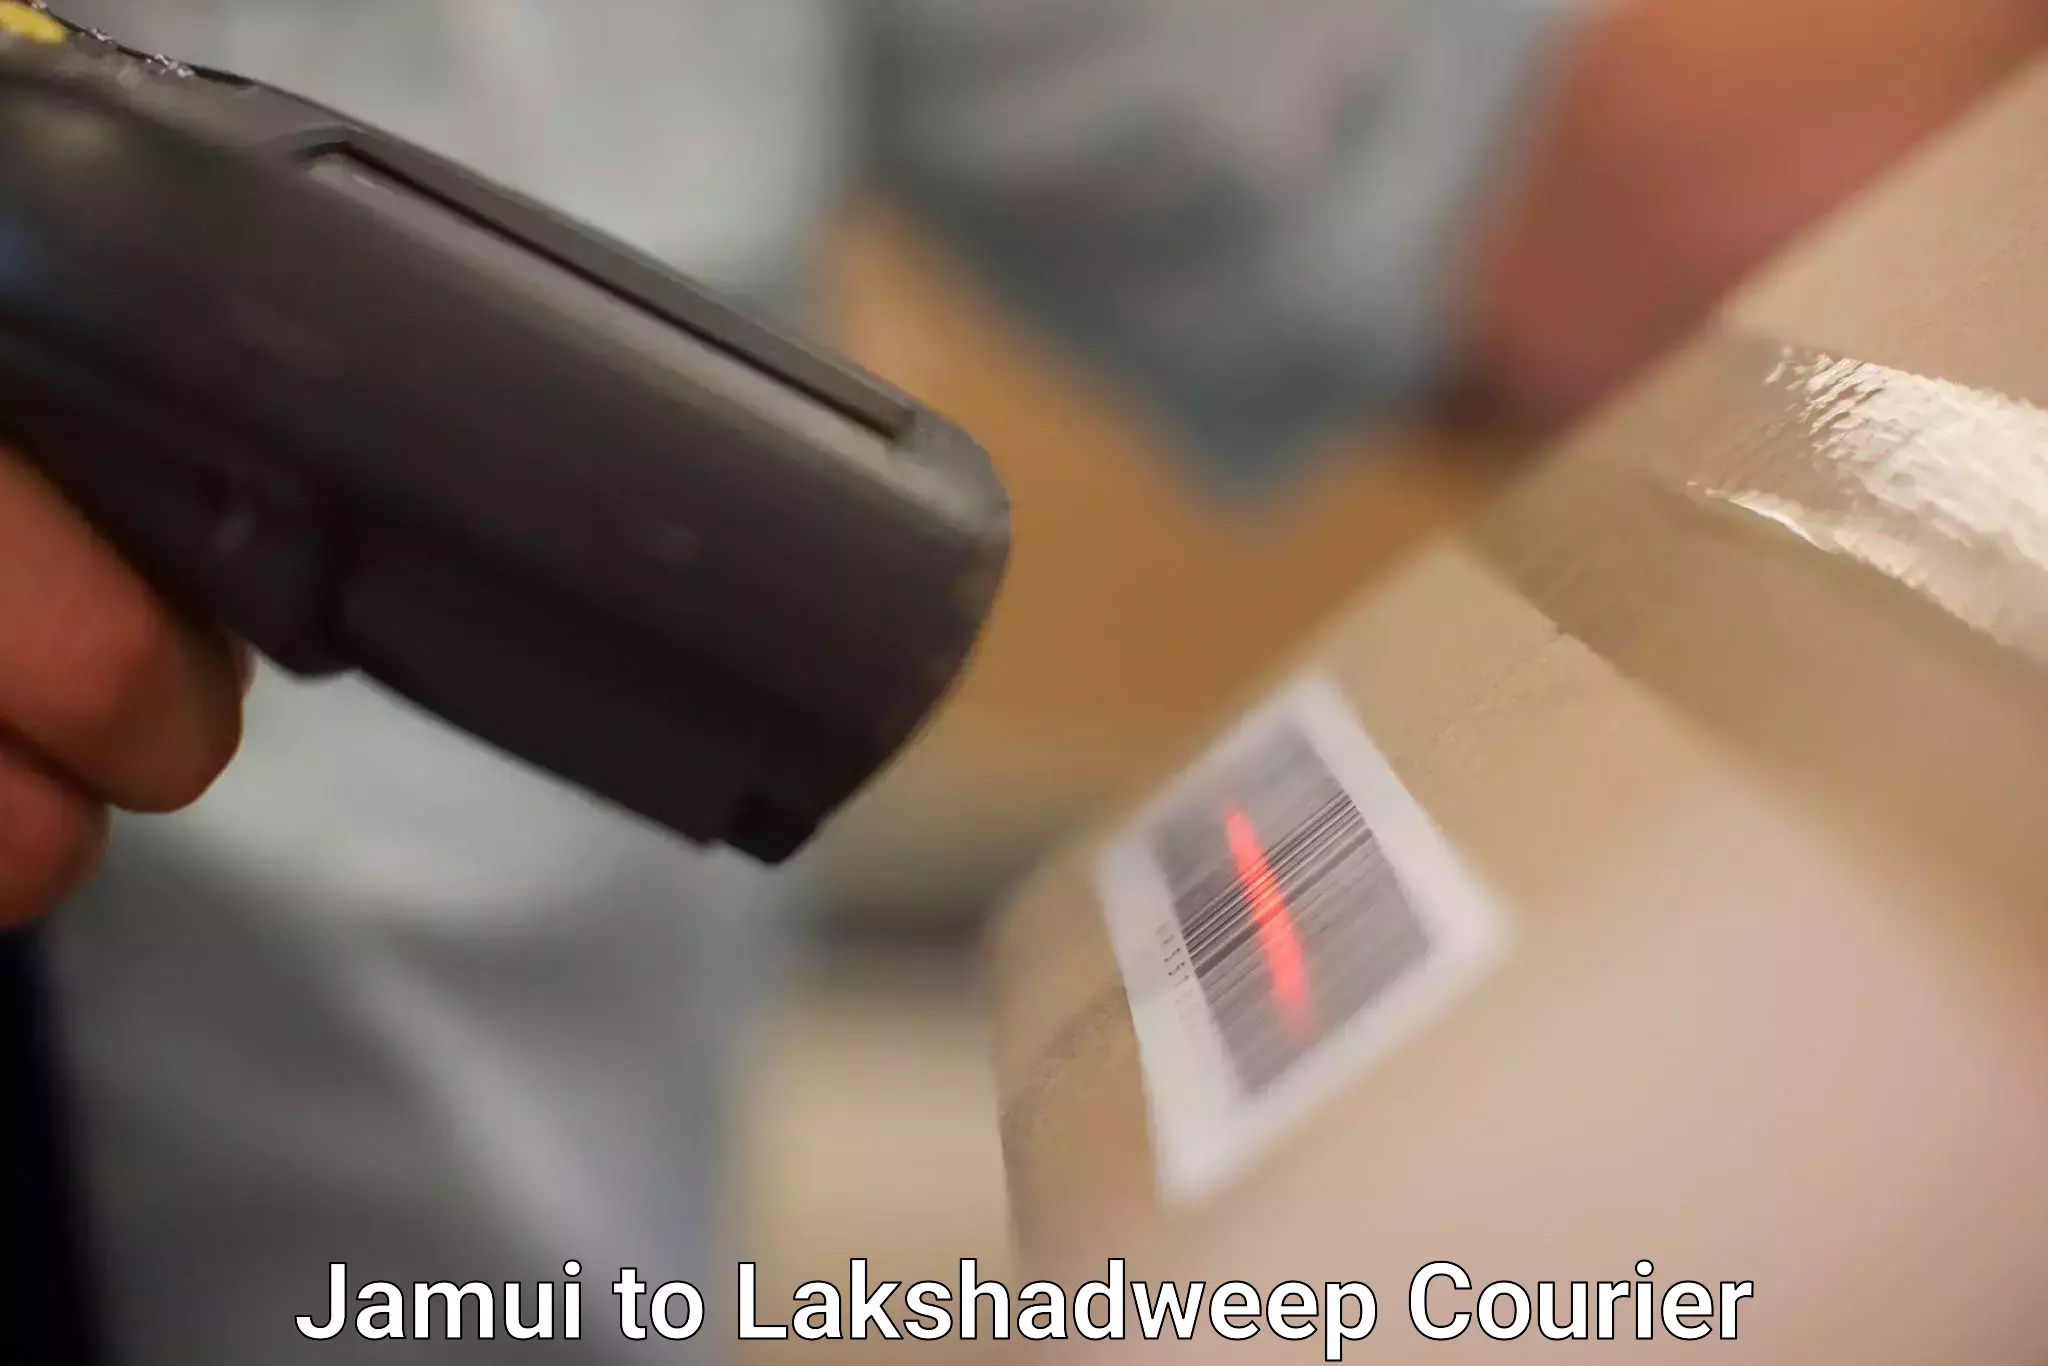 On-call courier service Jamui to Lakshadweep